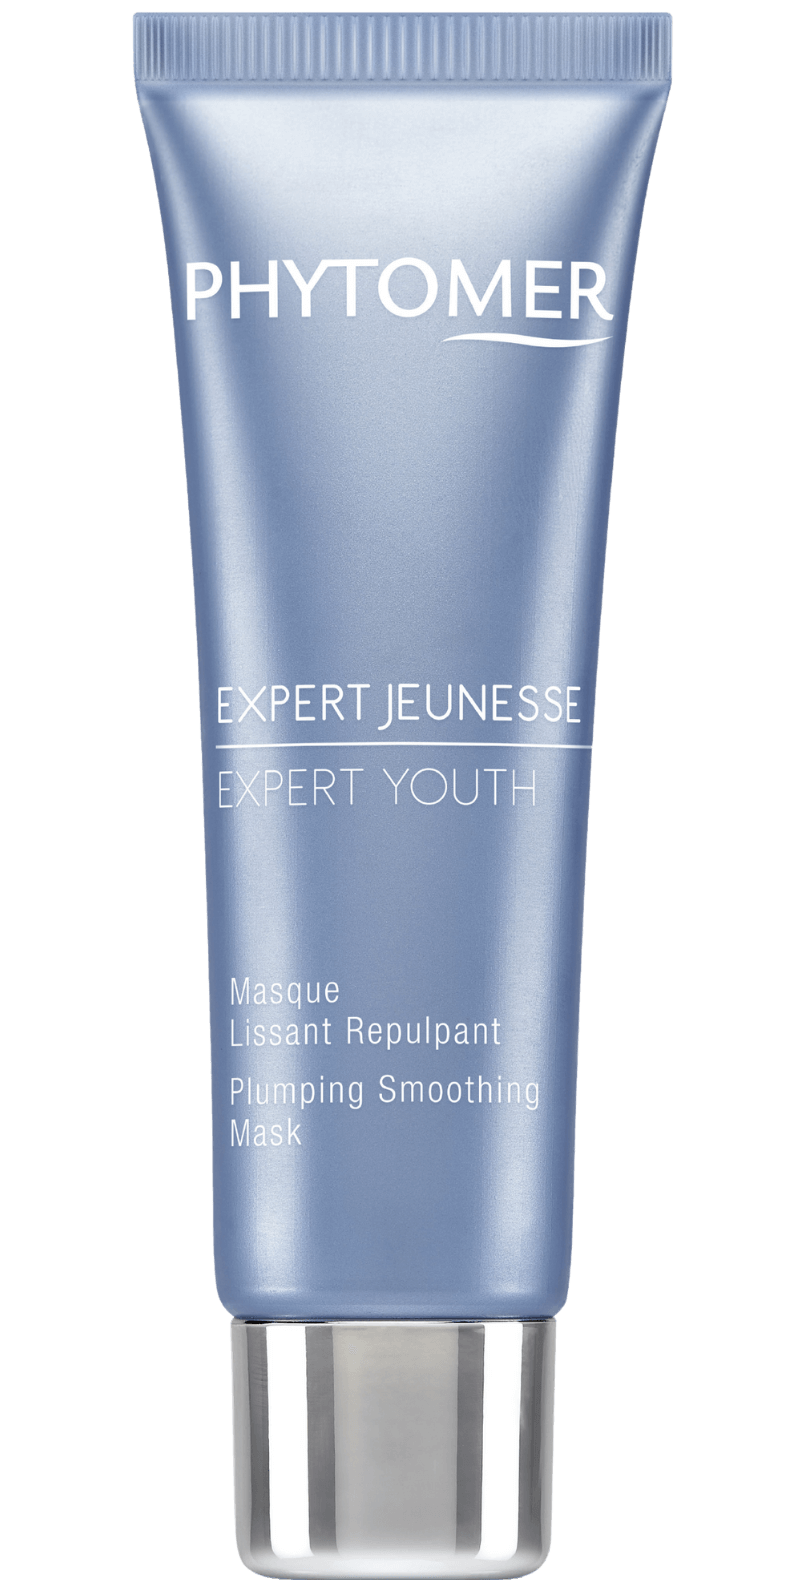 's Phytomer EXPERT YOUTH Plumping Smoothing Mask - Bellini's Skin and Parfumerie 